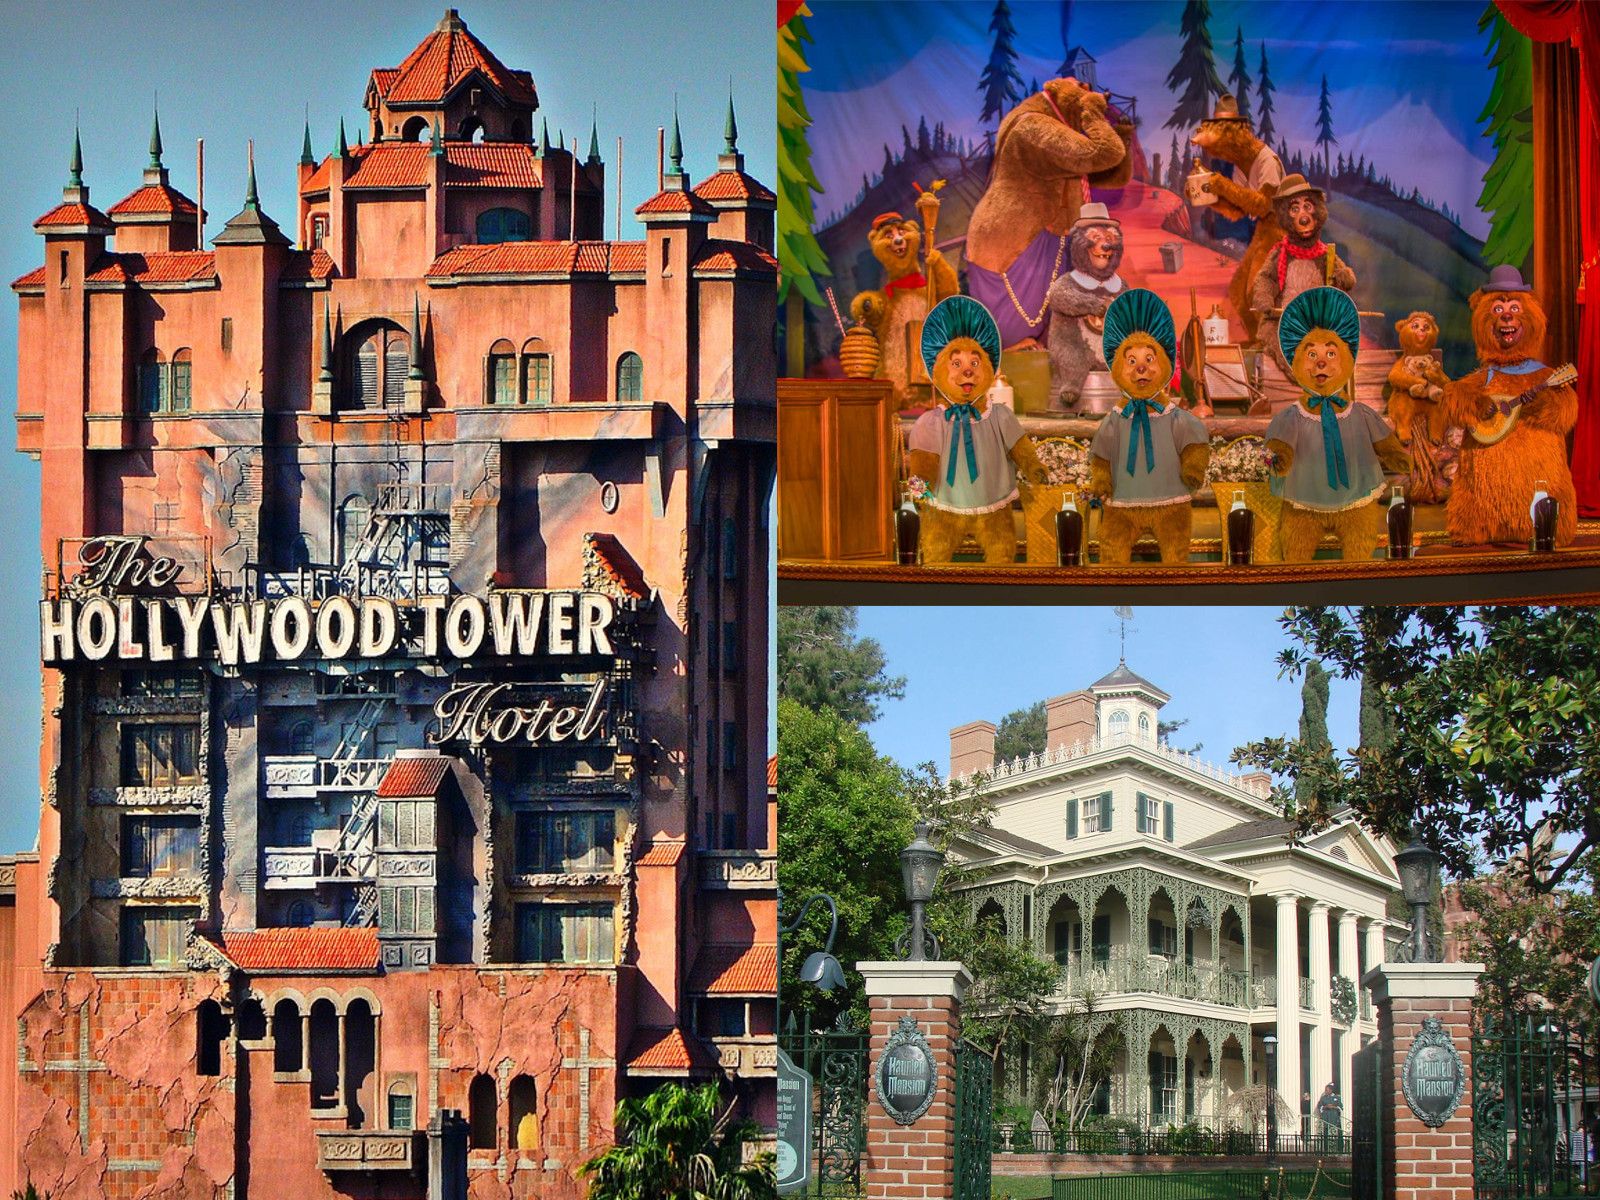 Tower of terror, Country bears jamboree e Haunted Mansion